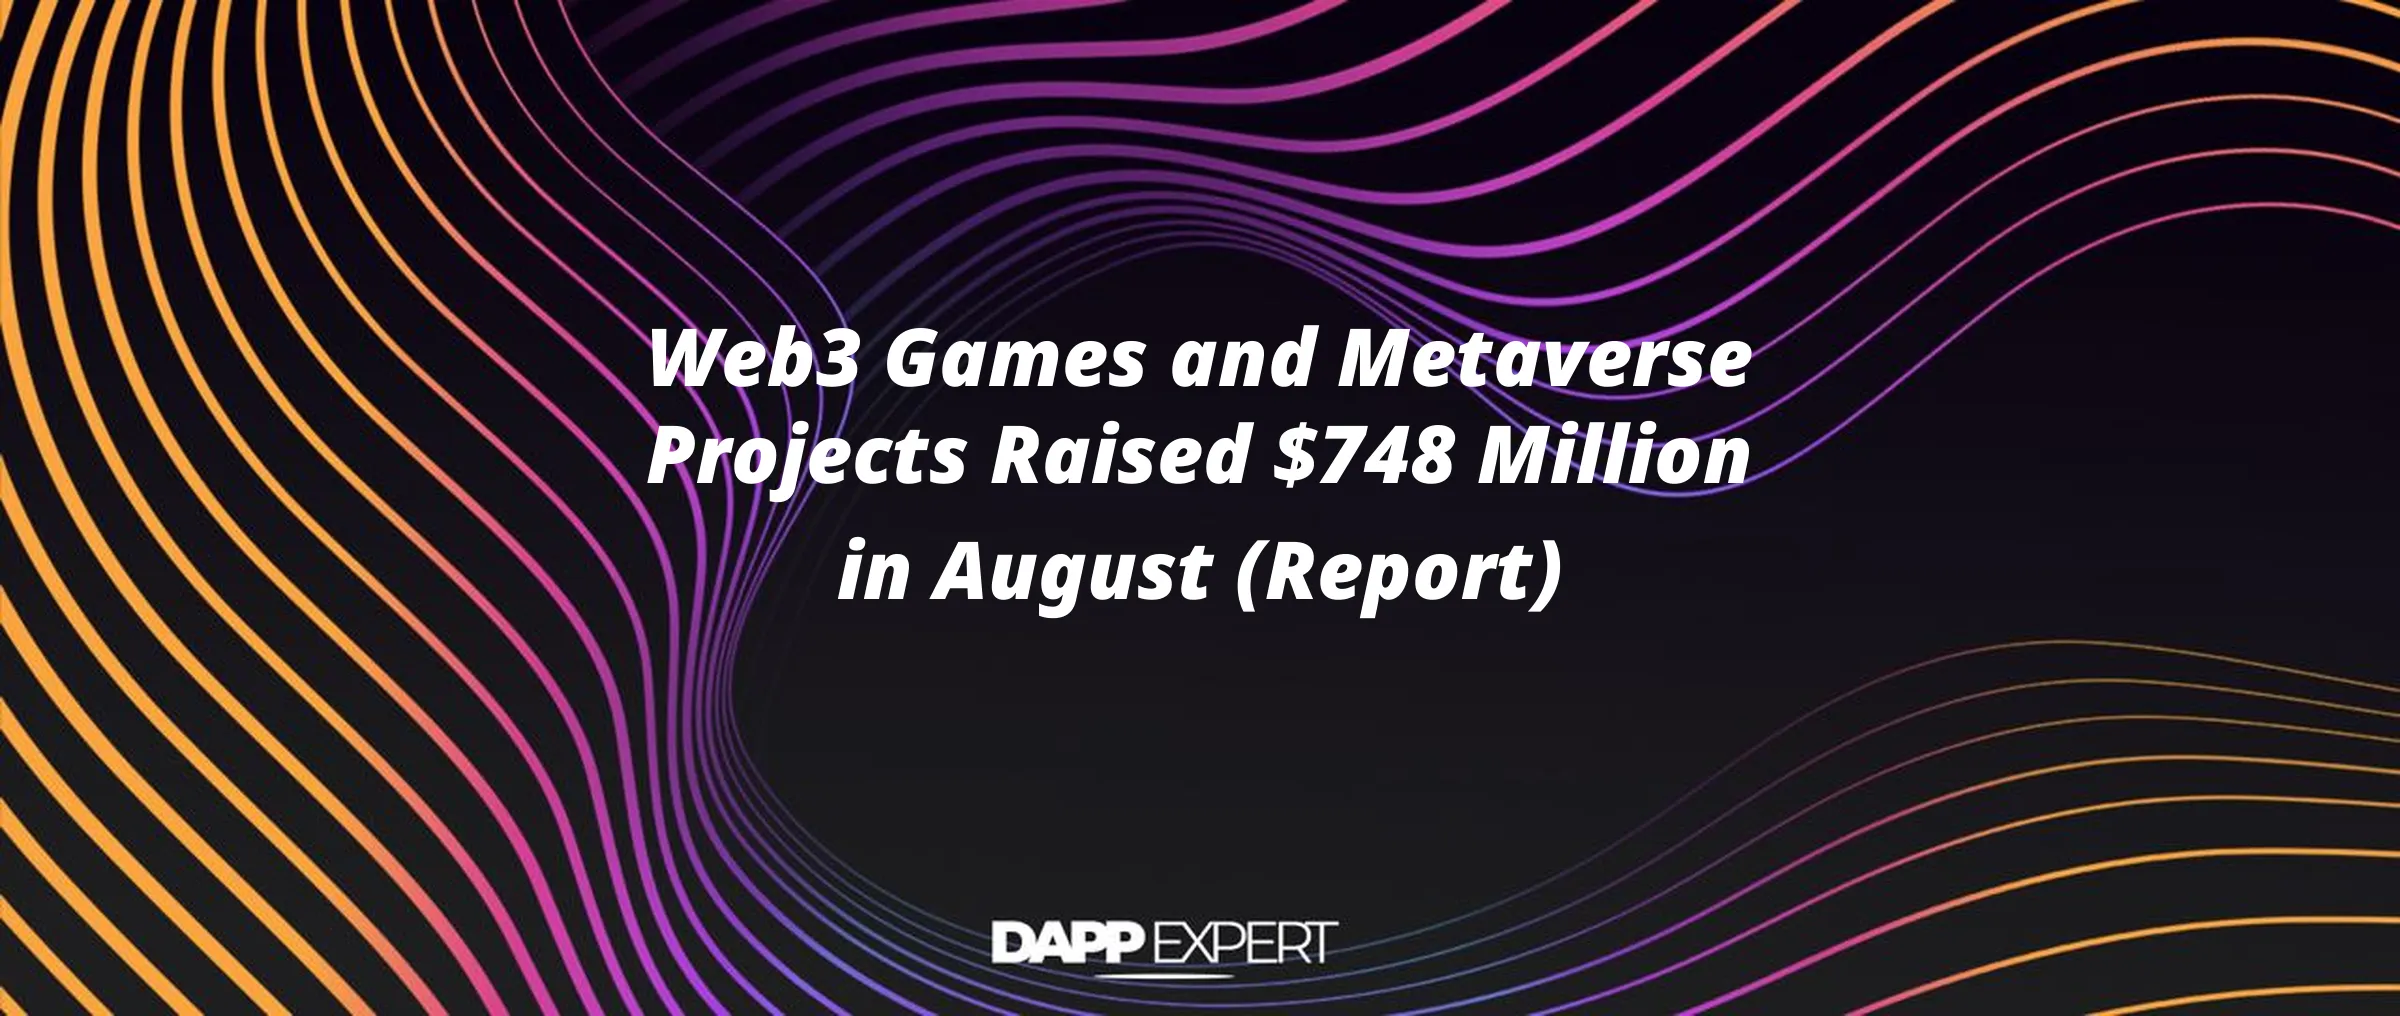 Web3 Games and Metaverse Projects Raised $748 Million in August (Report)